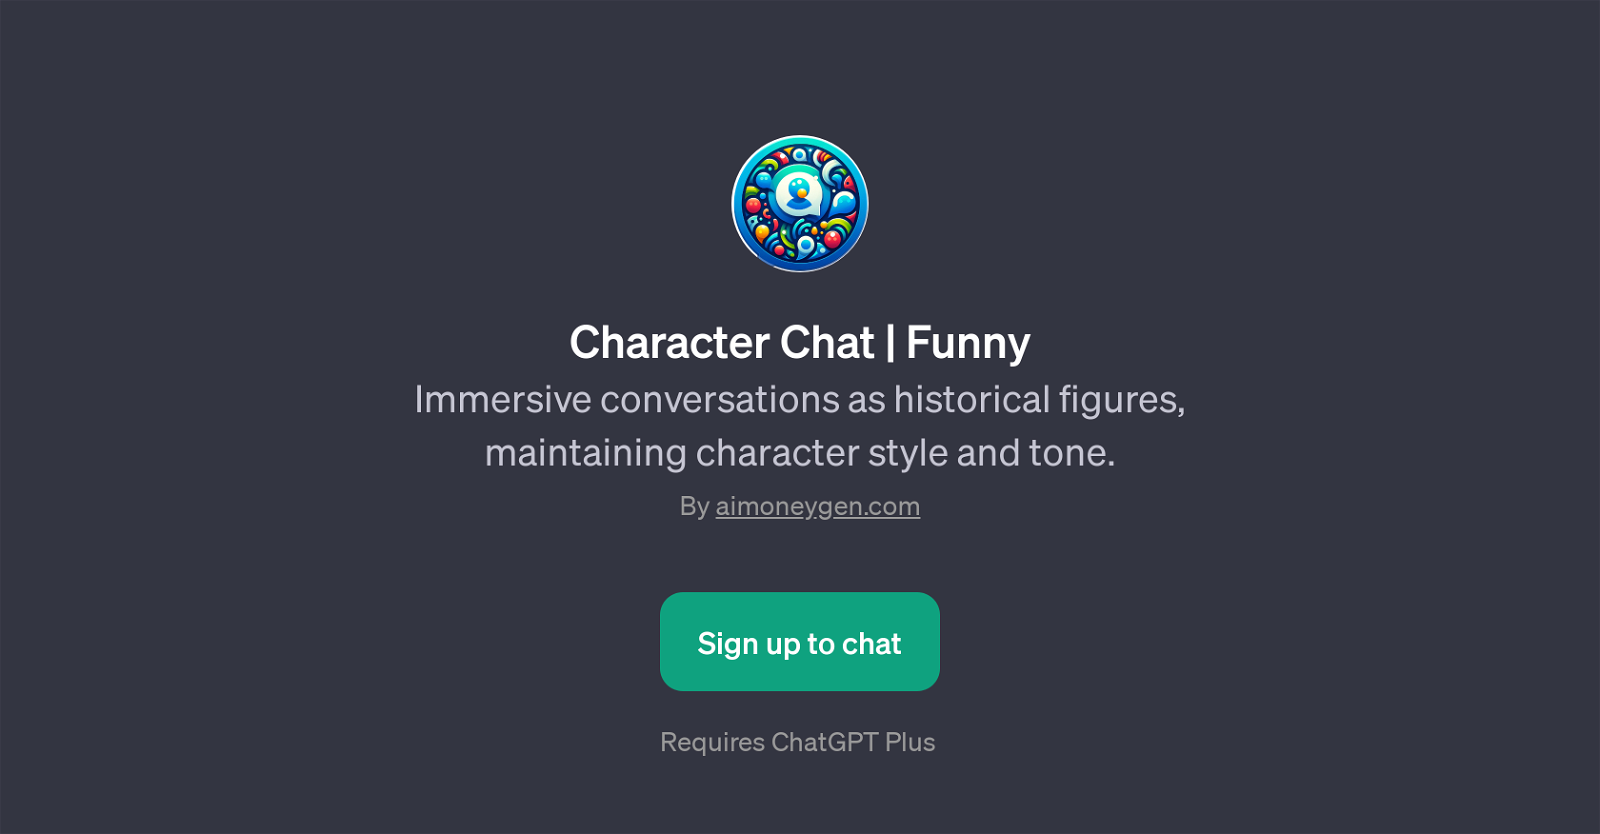 Character Chat | Funny website